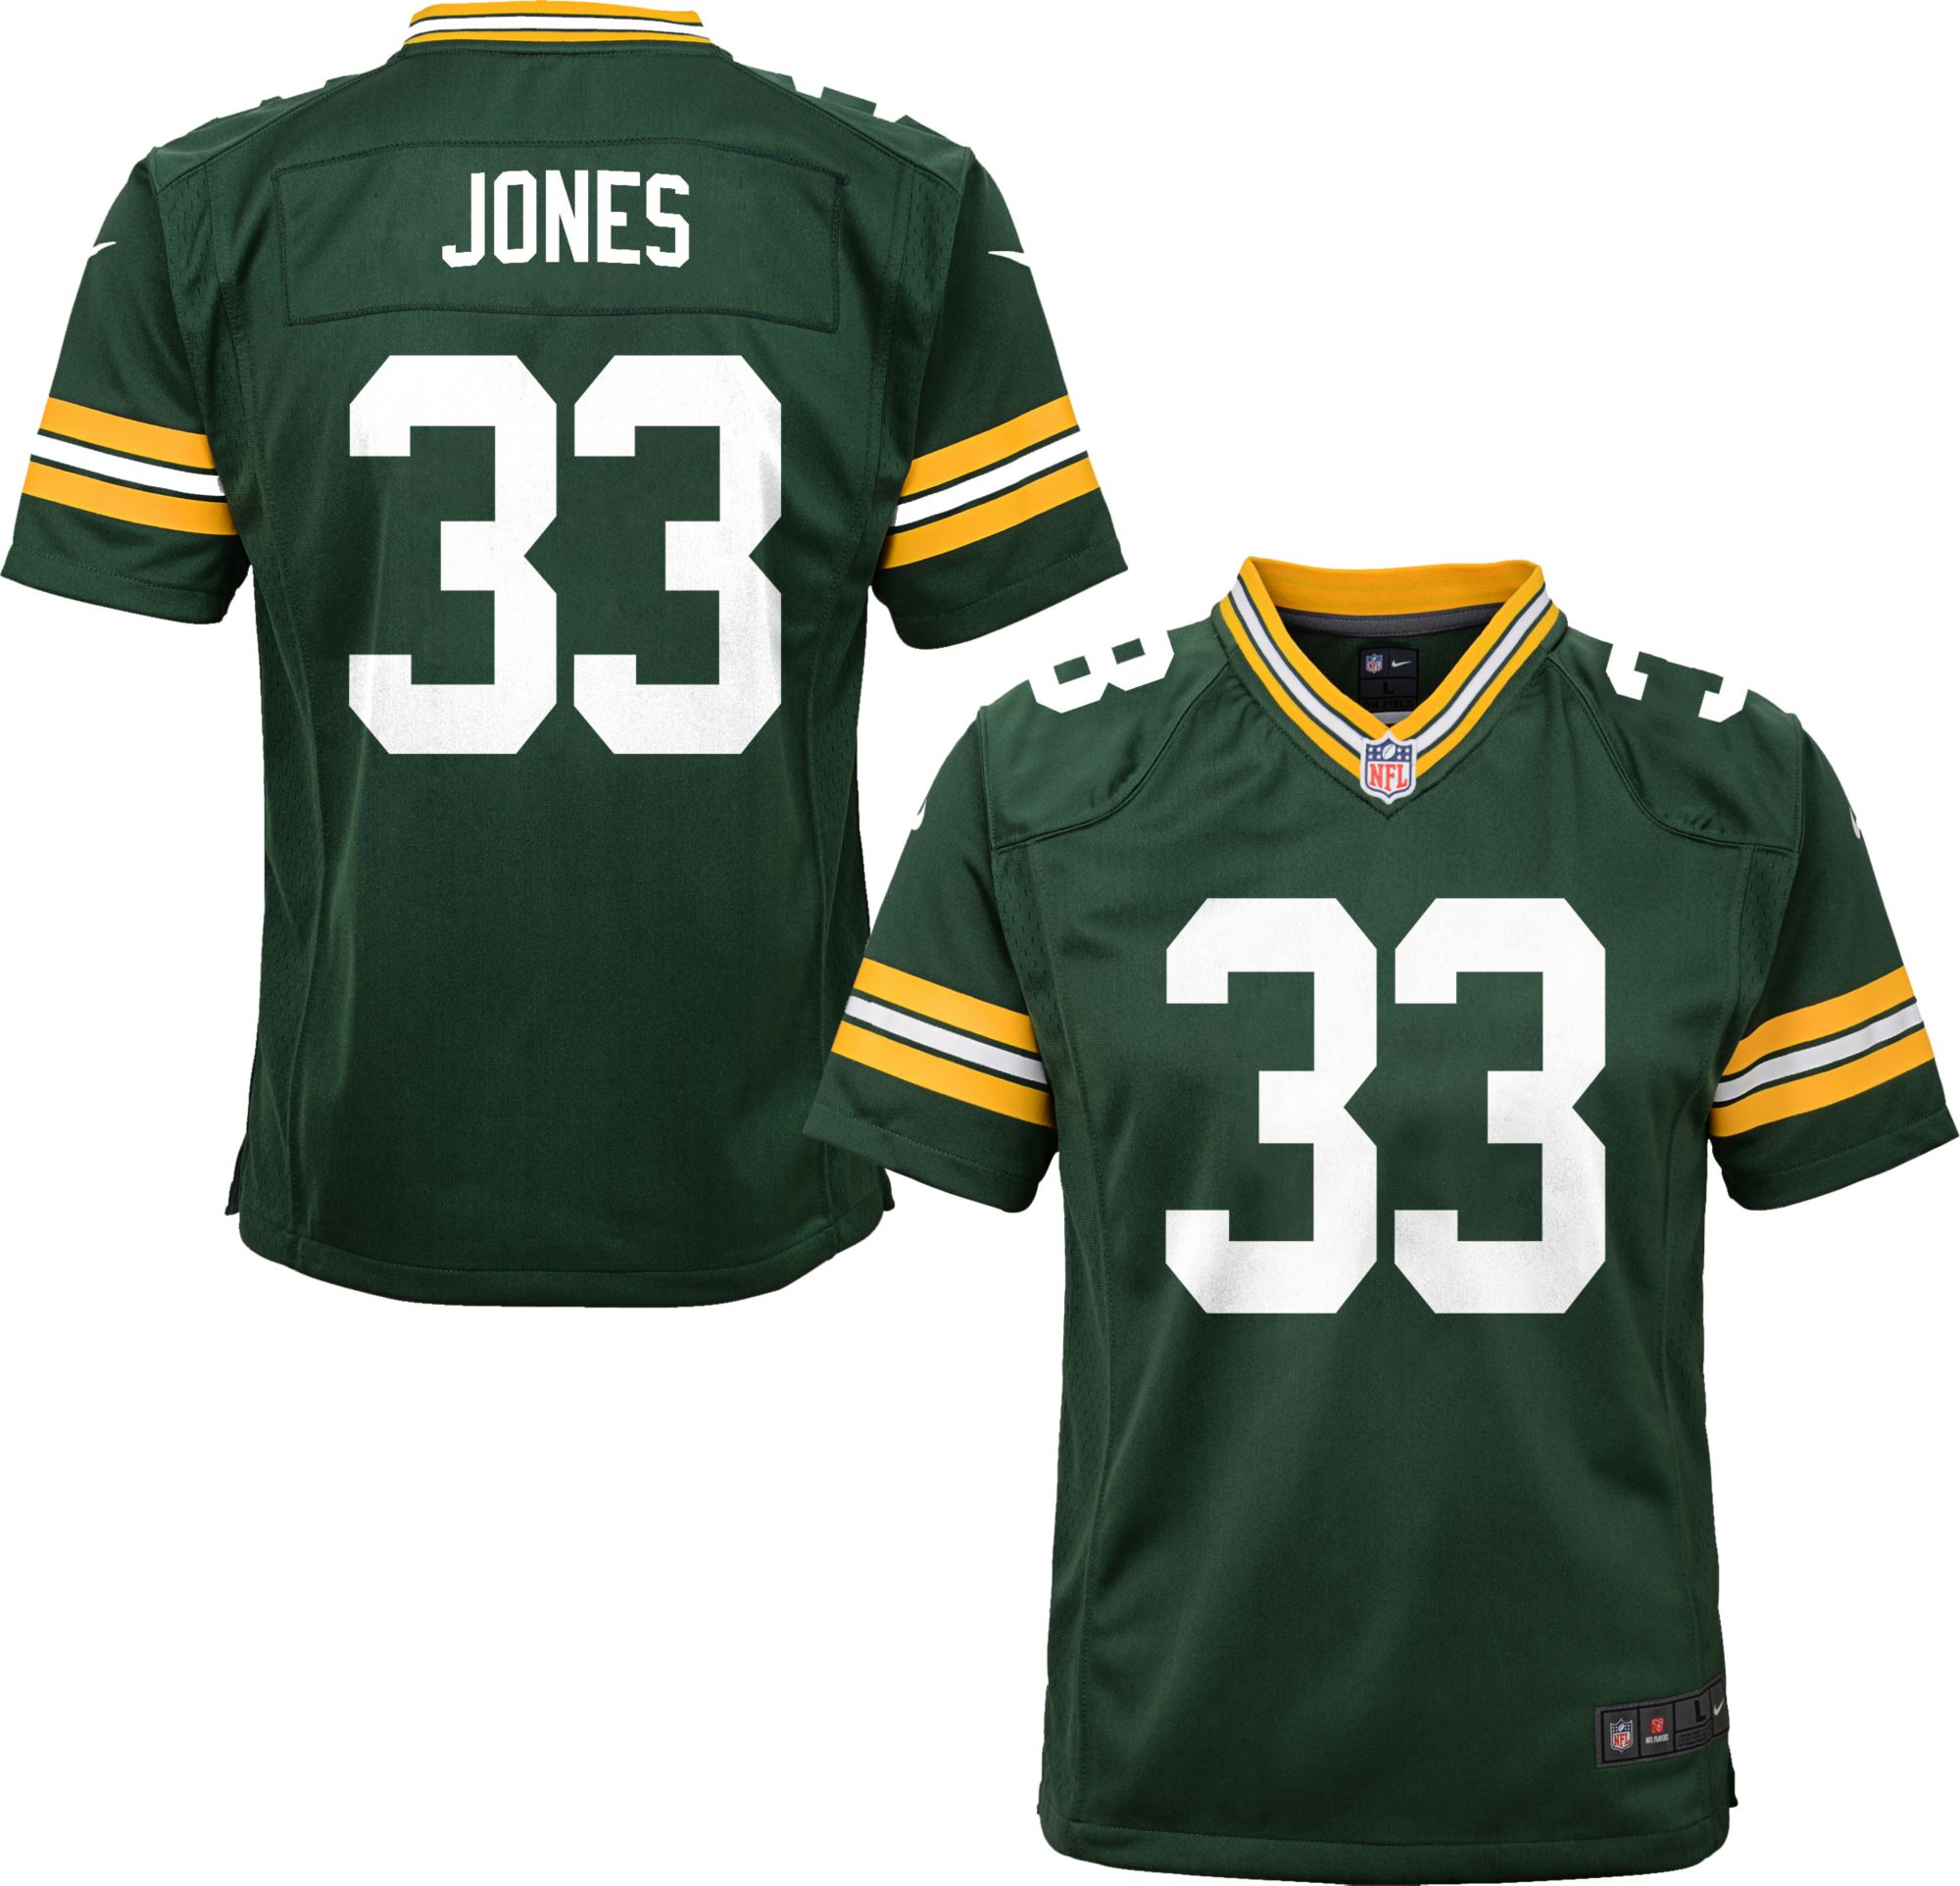 packers 33 jersey